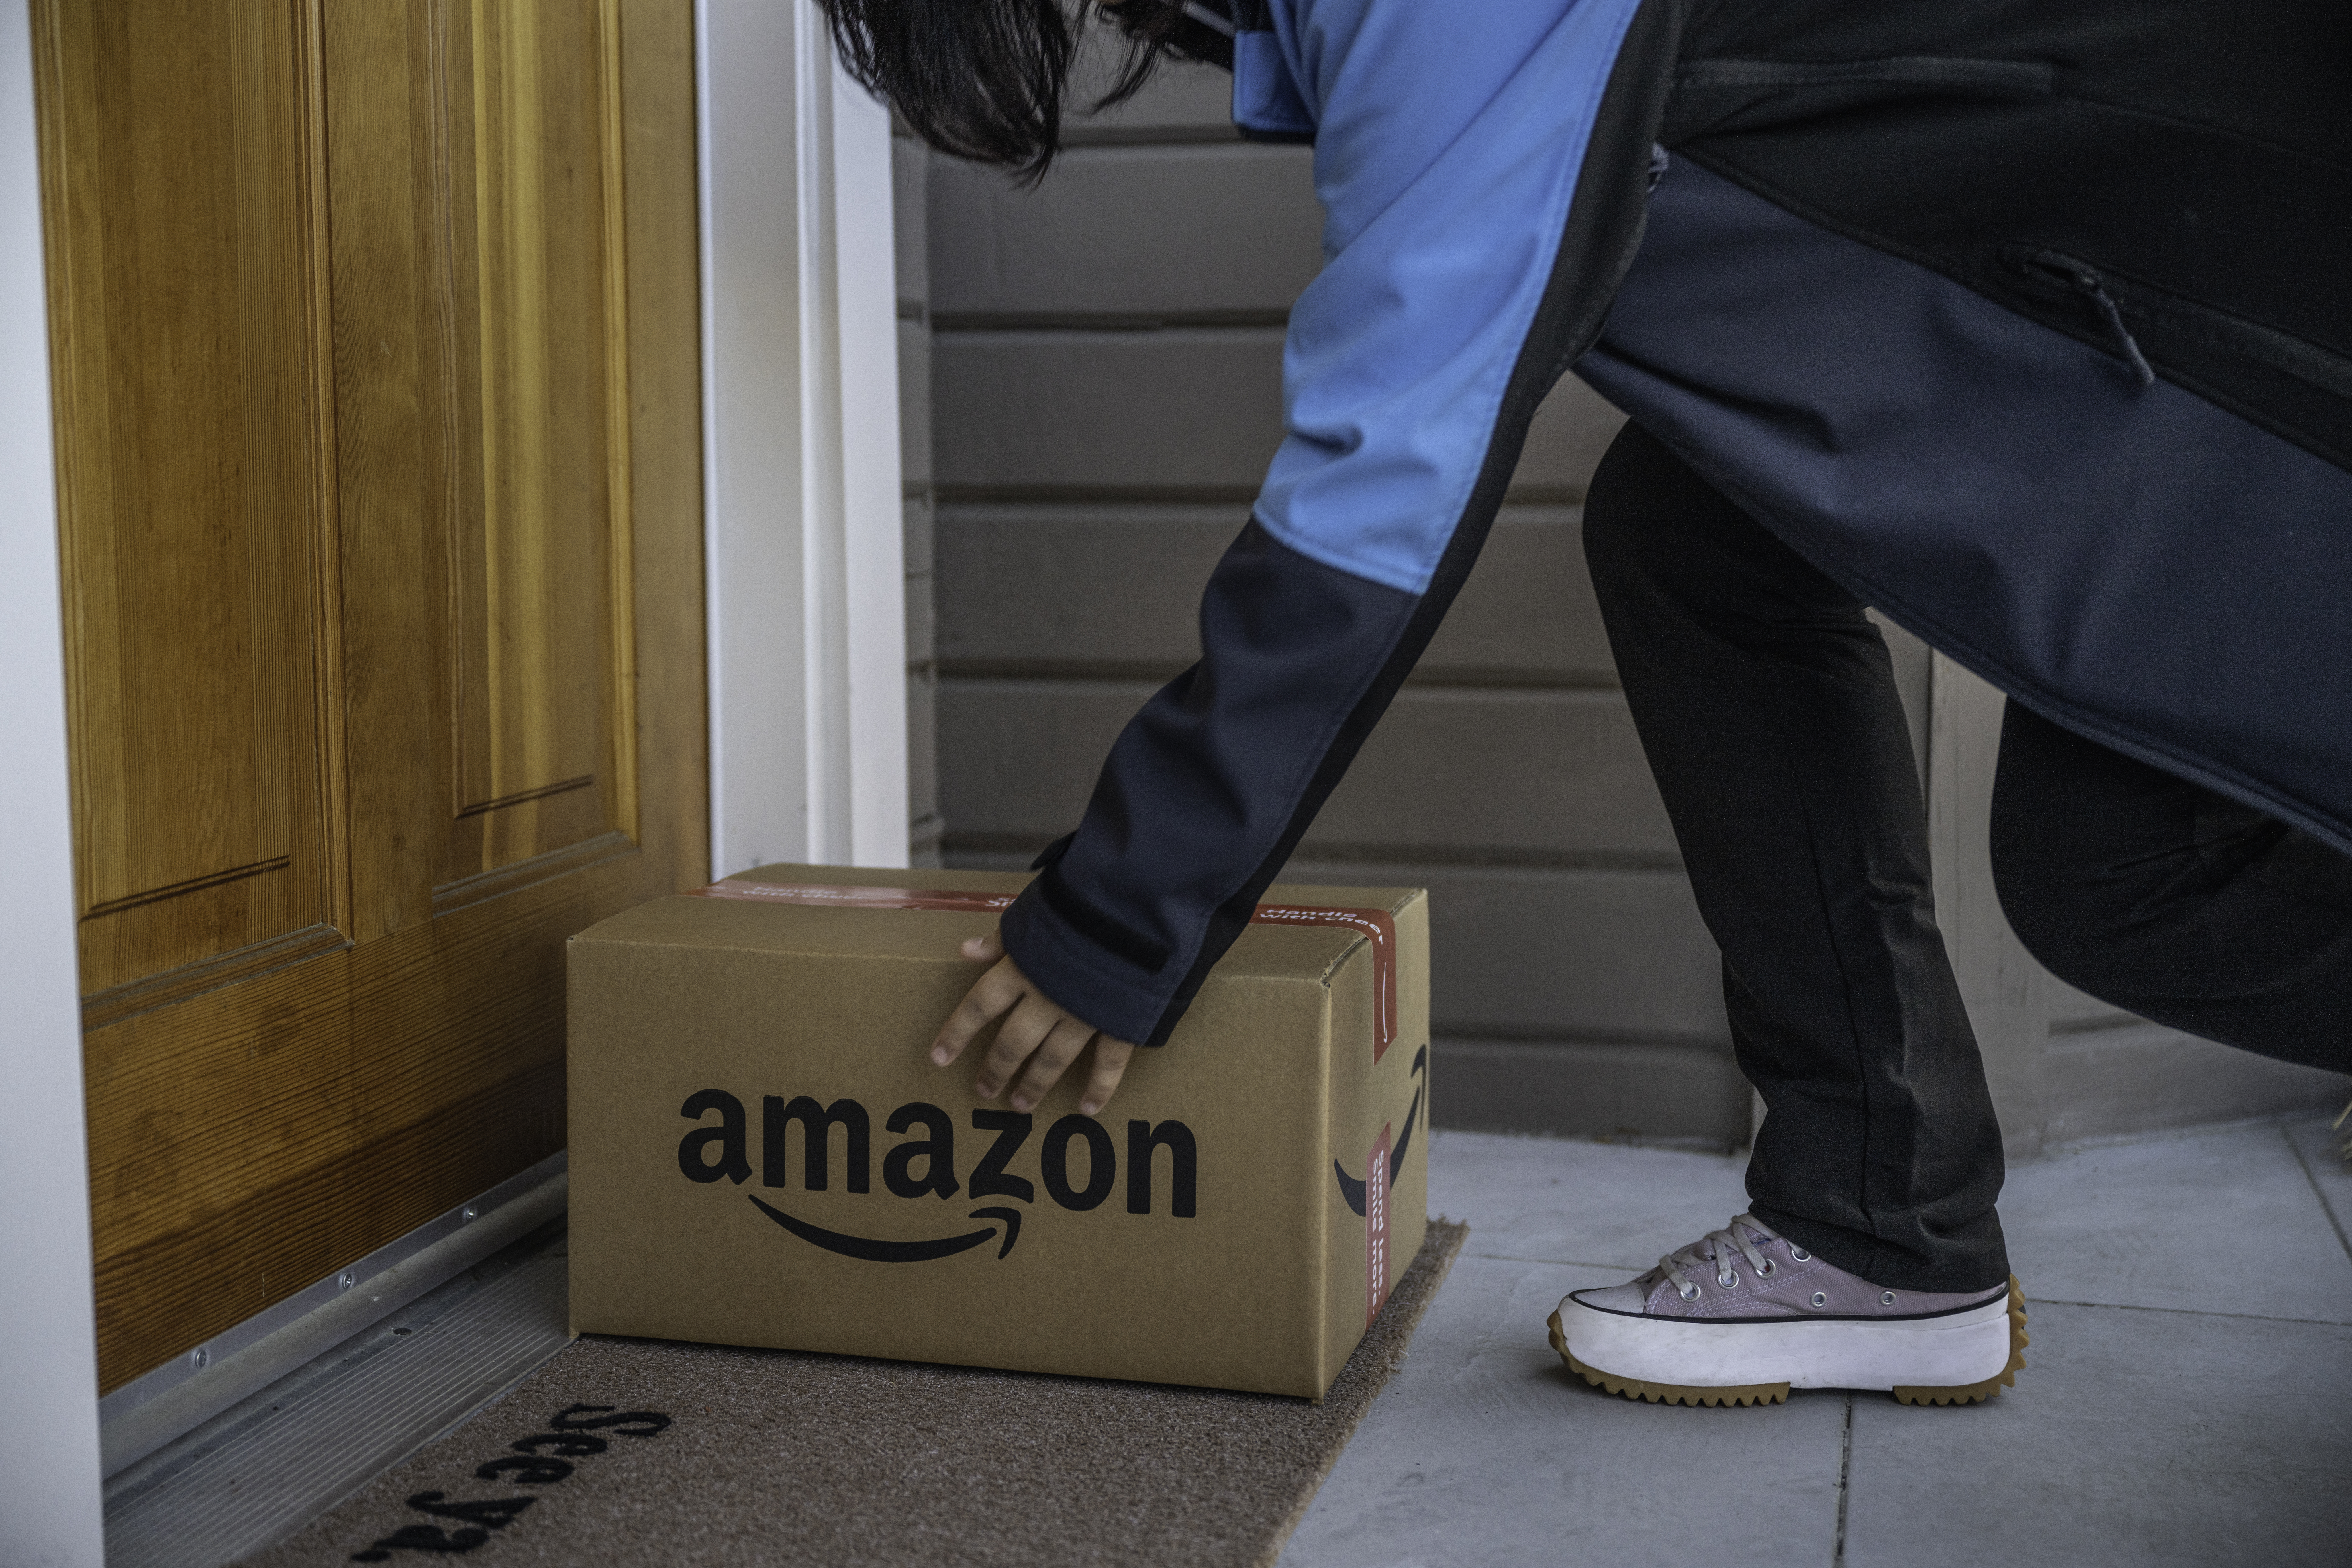 Working at Amazon: The pros, cons, and what to expect